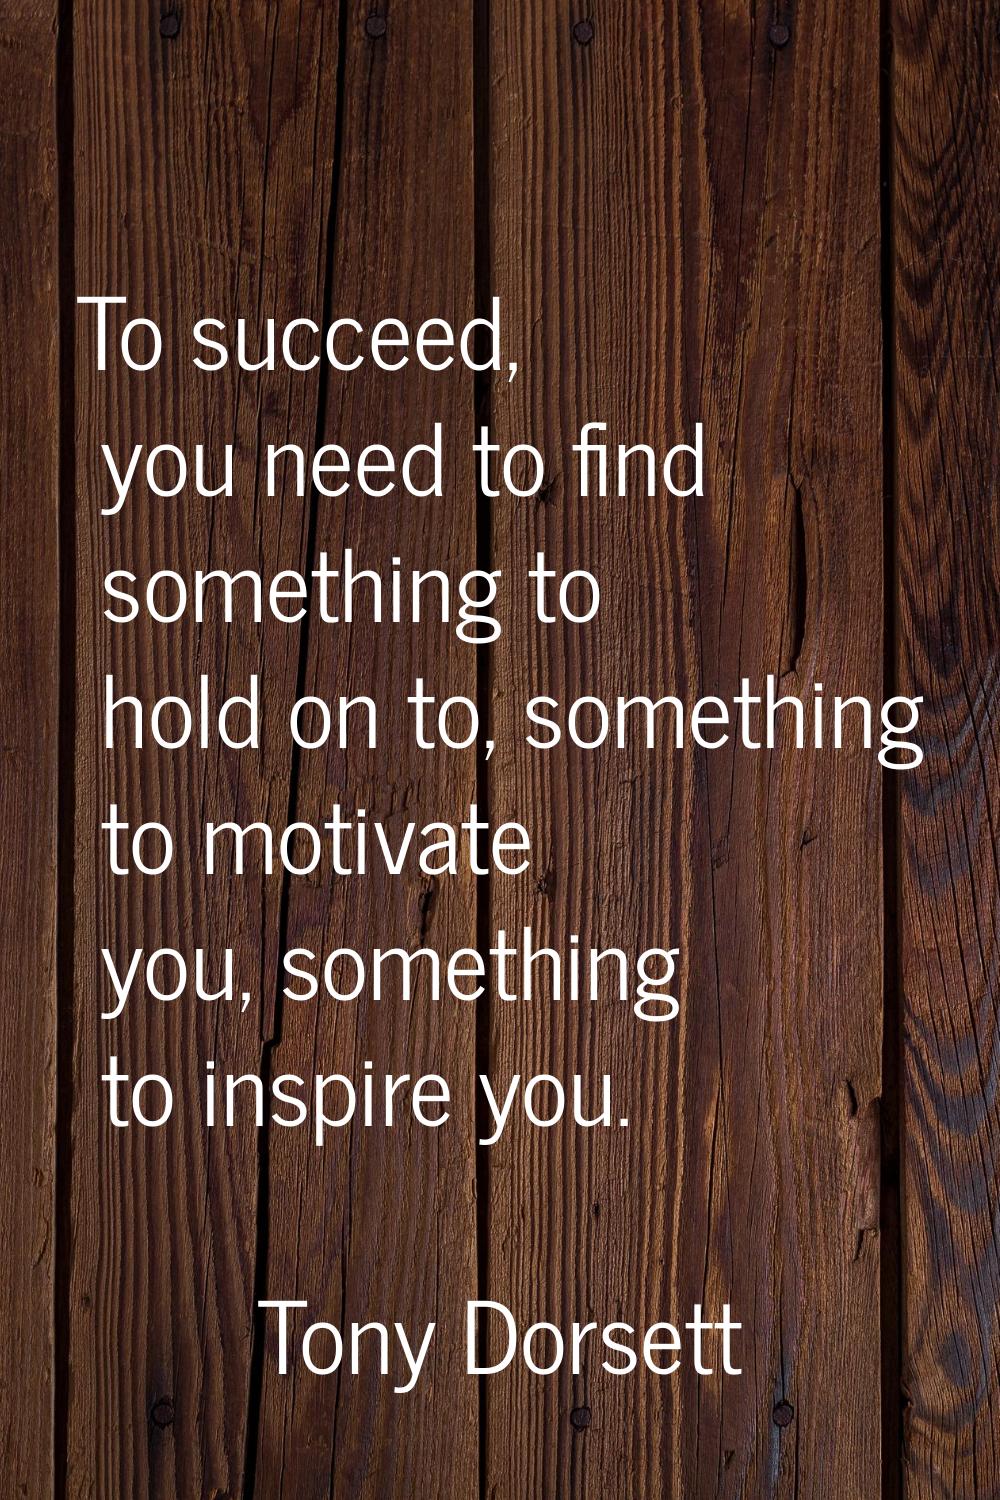 To succeed, you need to find something to hold on to, something to motivate you, something to inspi